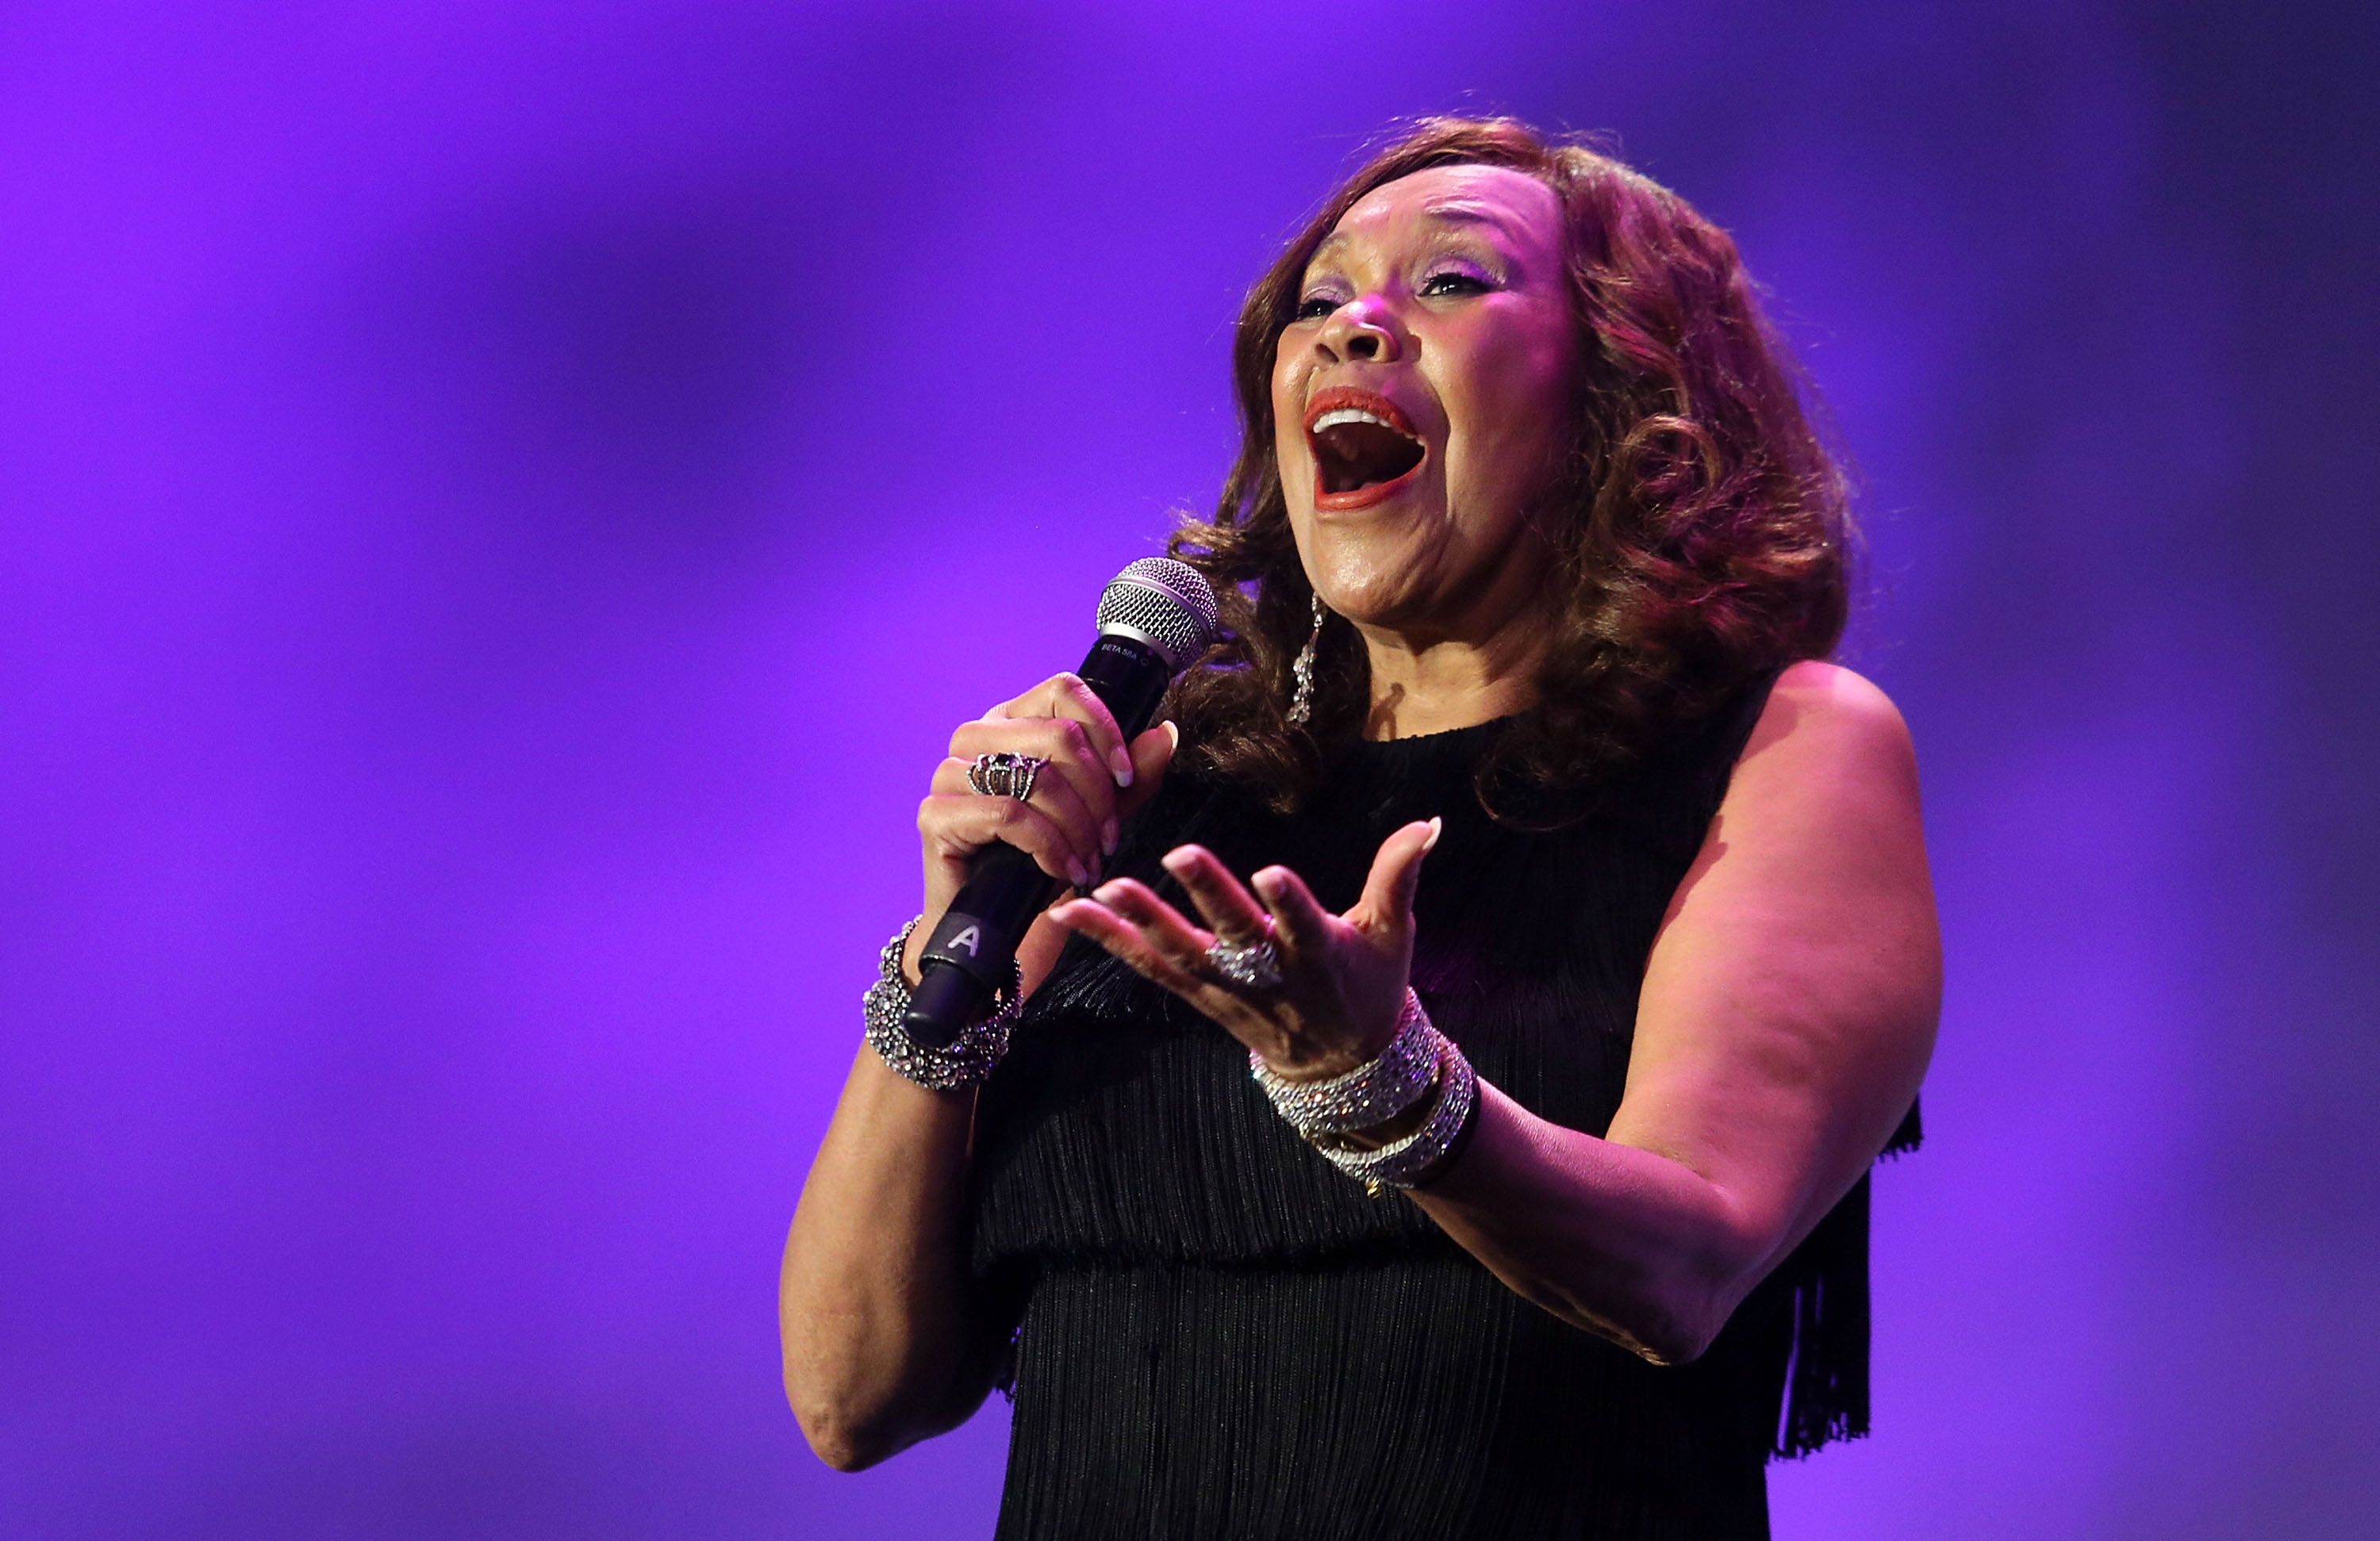 Anita Pointer, the co-founder of the Pointer Sisters, died at age 74